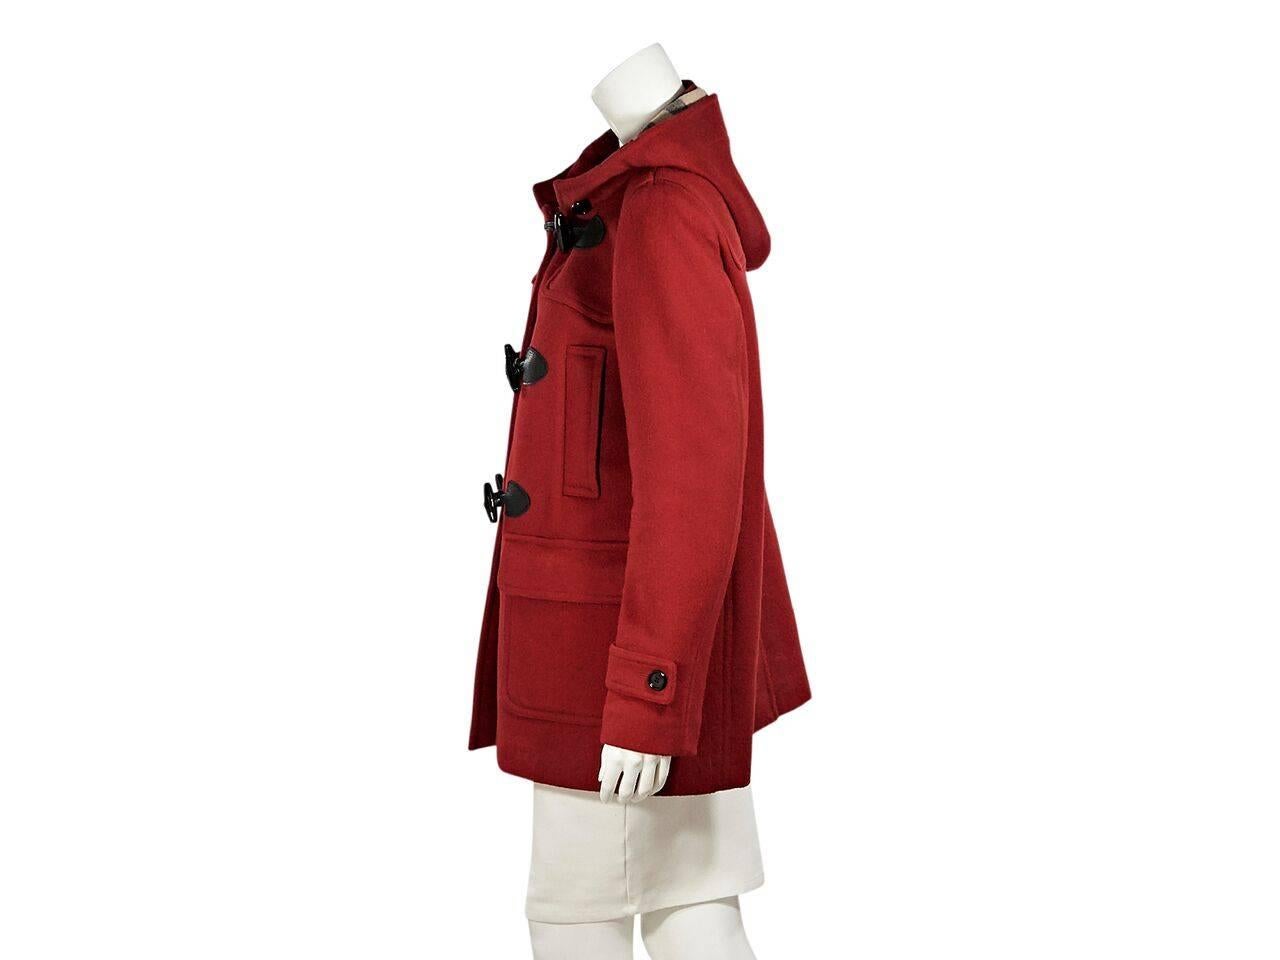 Product details:  Red hooded wool coat by Burberry Brit.  Long sleeves.  Toggle closure.  Chest slide pockets.  Waist flap pockets.  Back center hem vent.  Nova check lining. 
Condition: Pre-owned. Very good.
Est. Retail $ 1,095.00